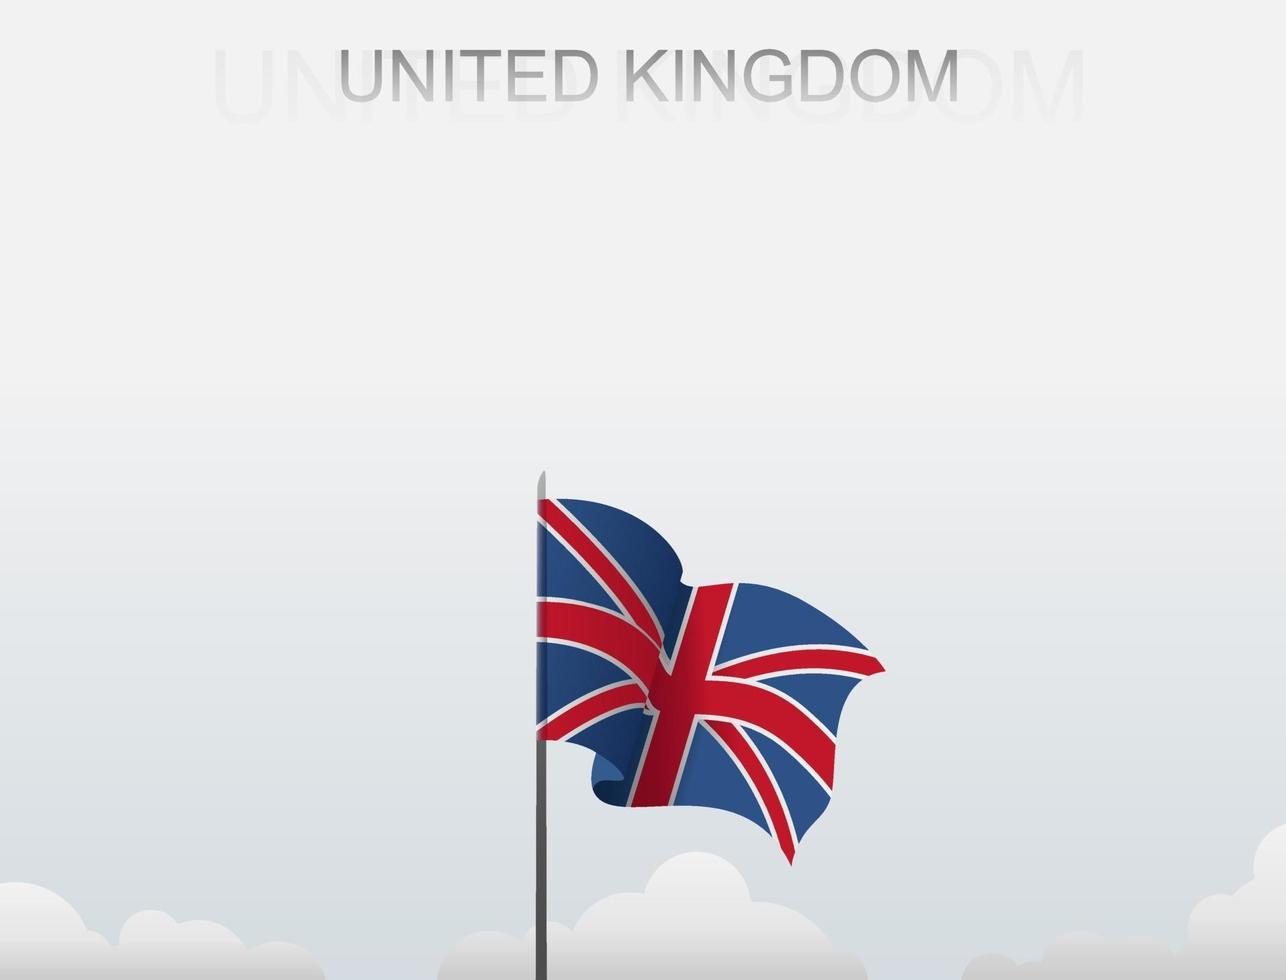 The United Kingdom flag is flying on a pole that stands tall under the white sky vector